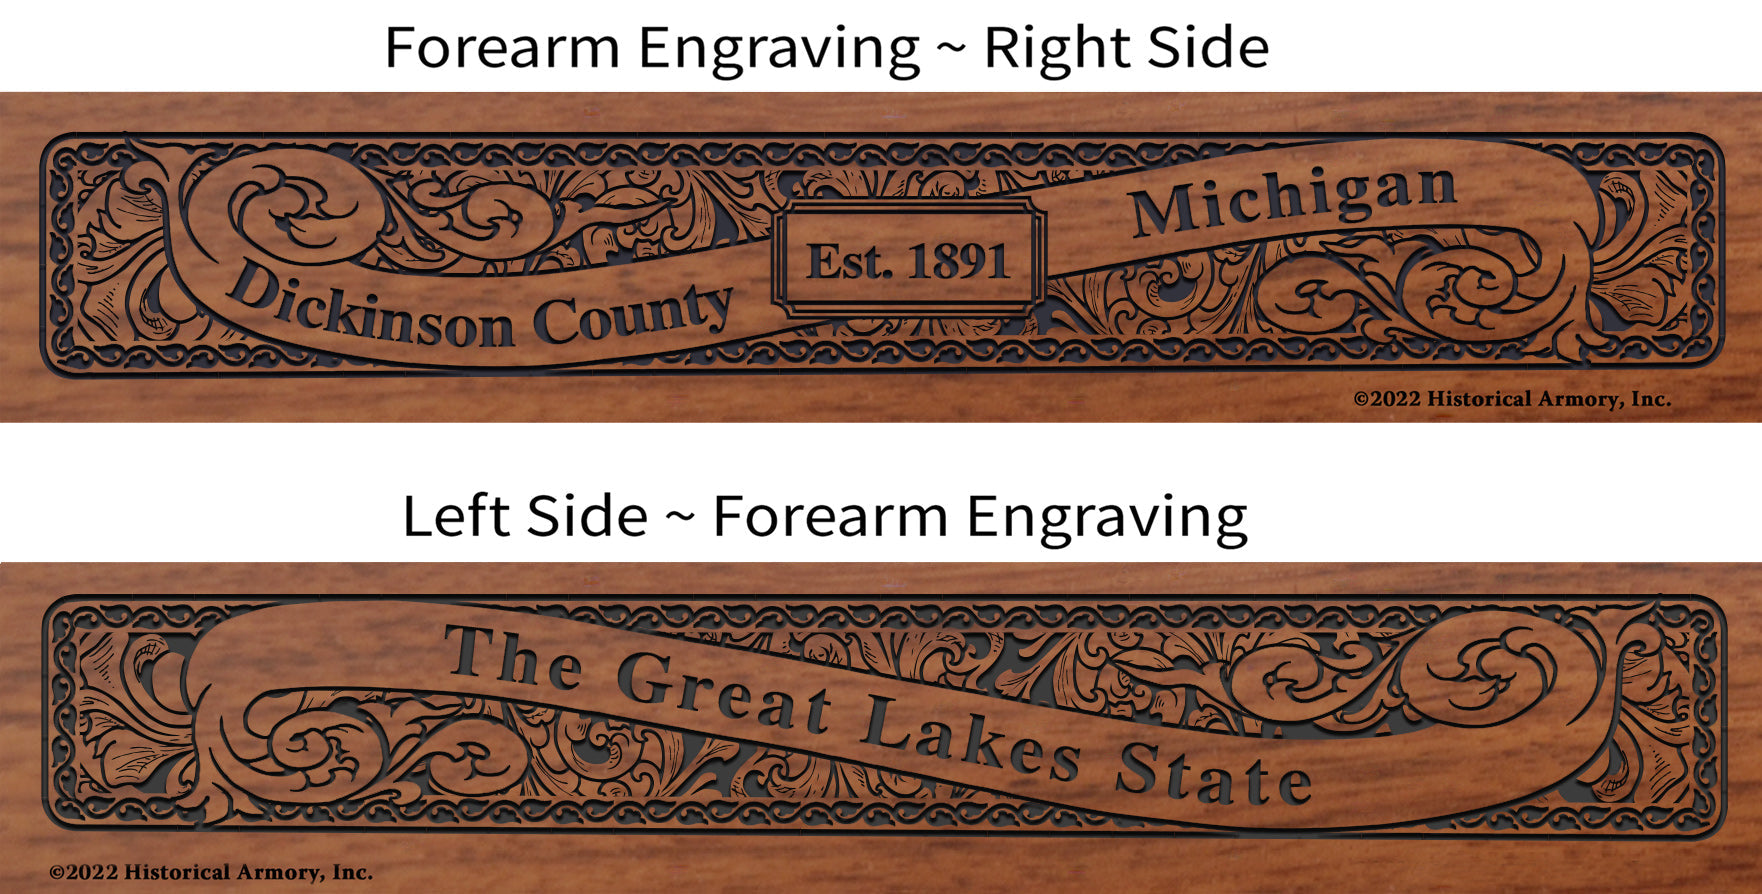 Dickinson County Michigan Engraved Rifle Forearm